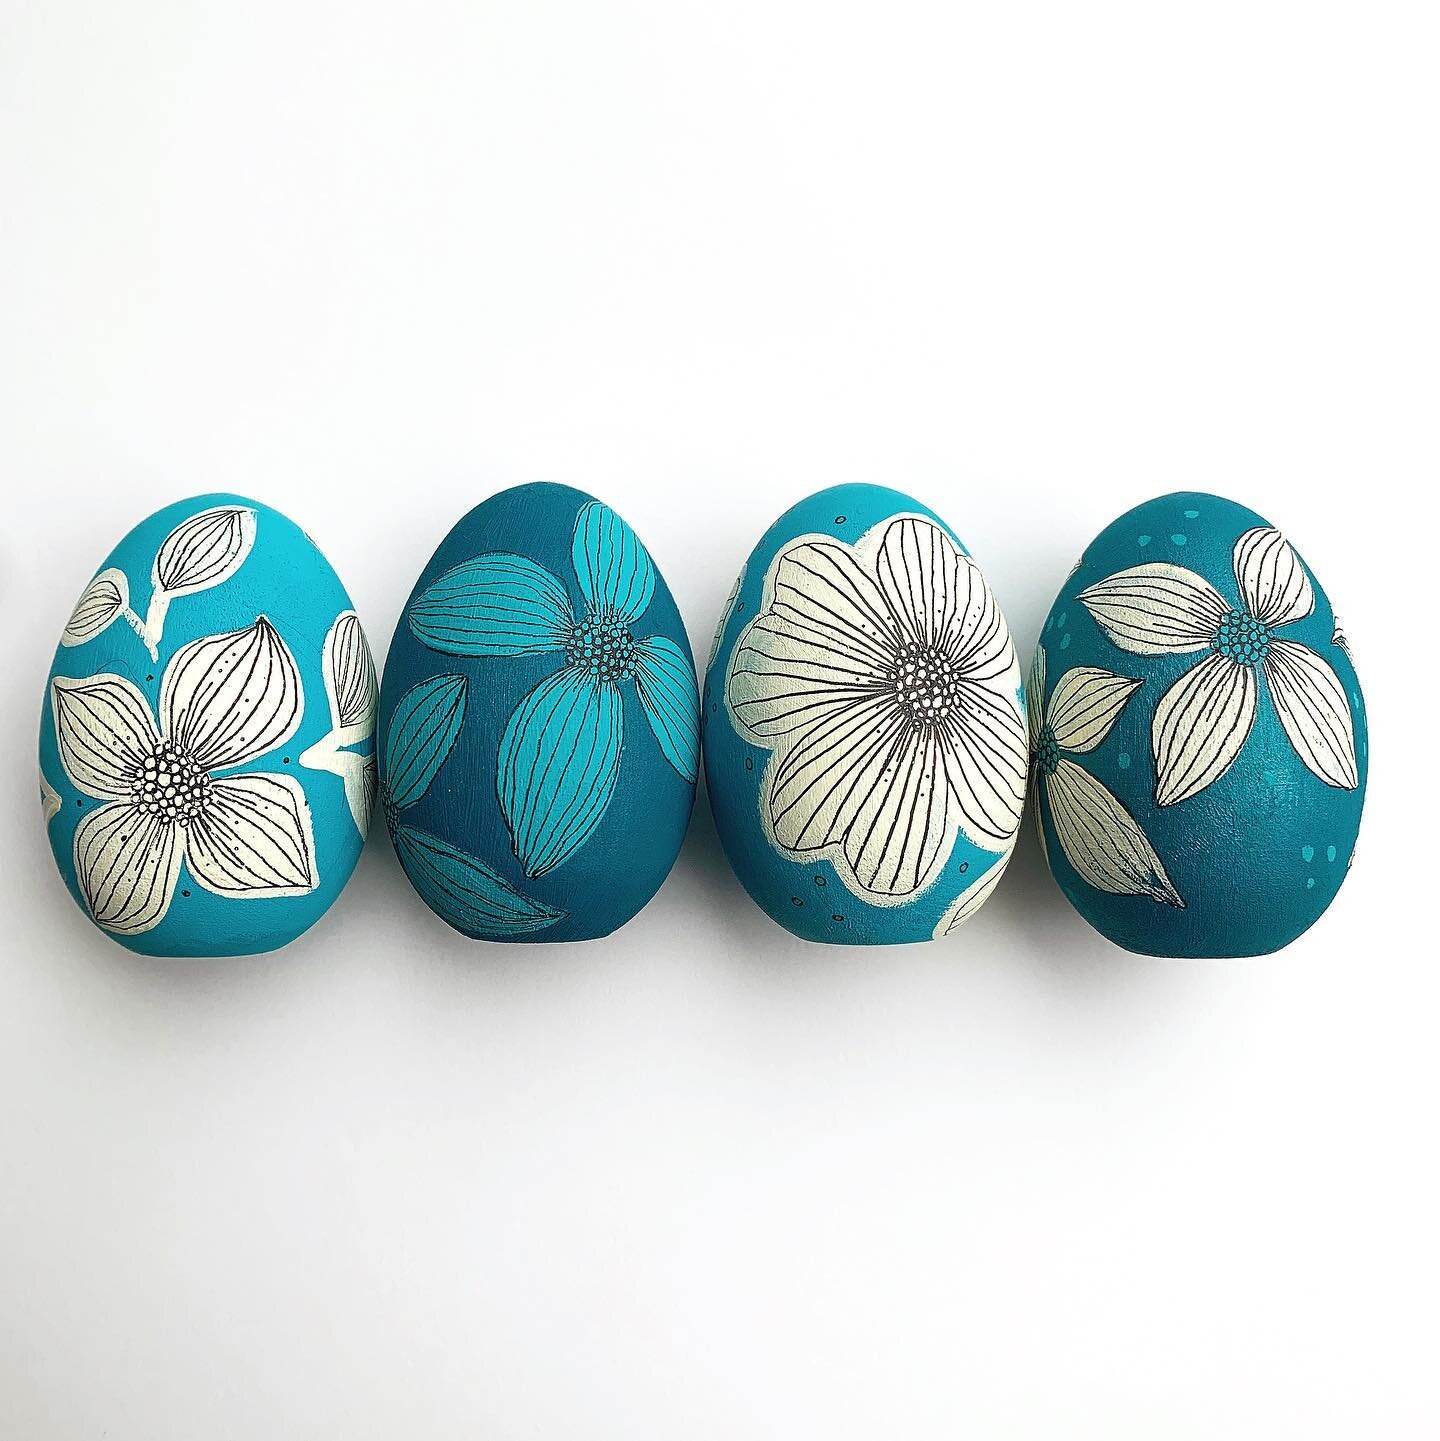 Happy Easter! I painted a few eggs this week to add to my collection. I hope you had a wonderful weekend. 🐇🌸